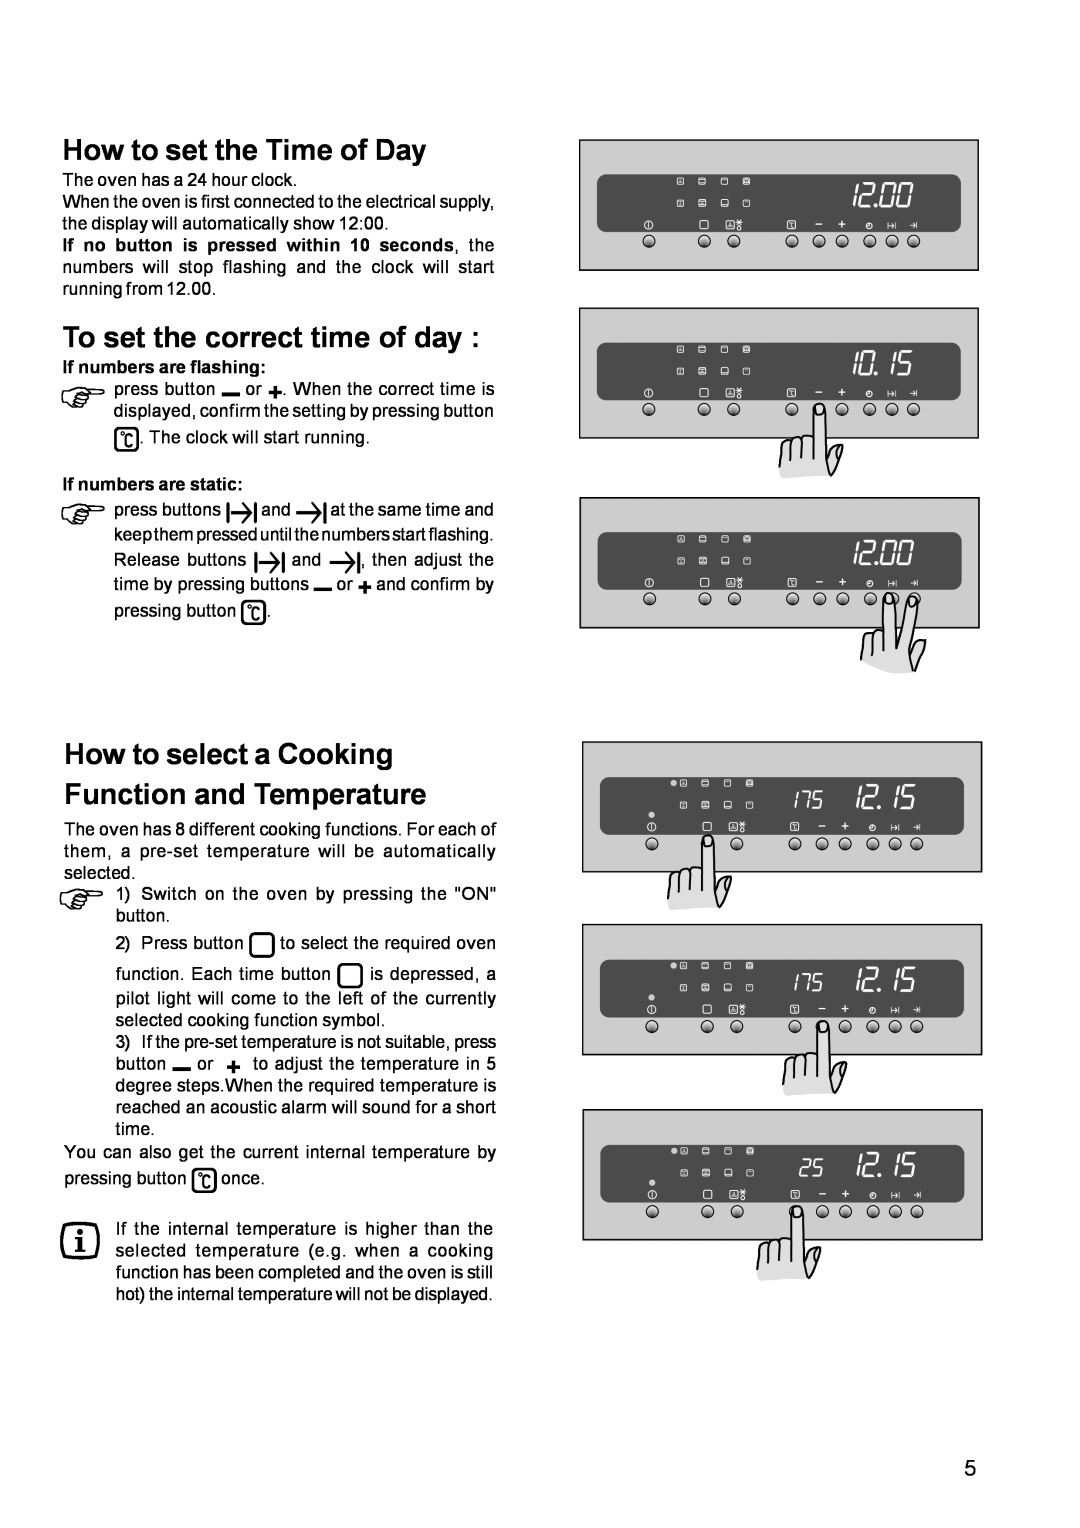 Zanussi ZBM 972 manual How to set the Time of Day, To set the correct time of day 